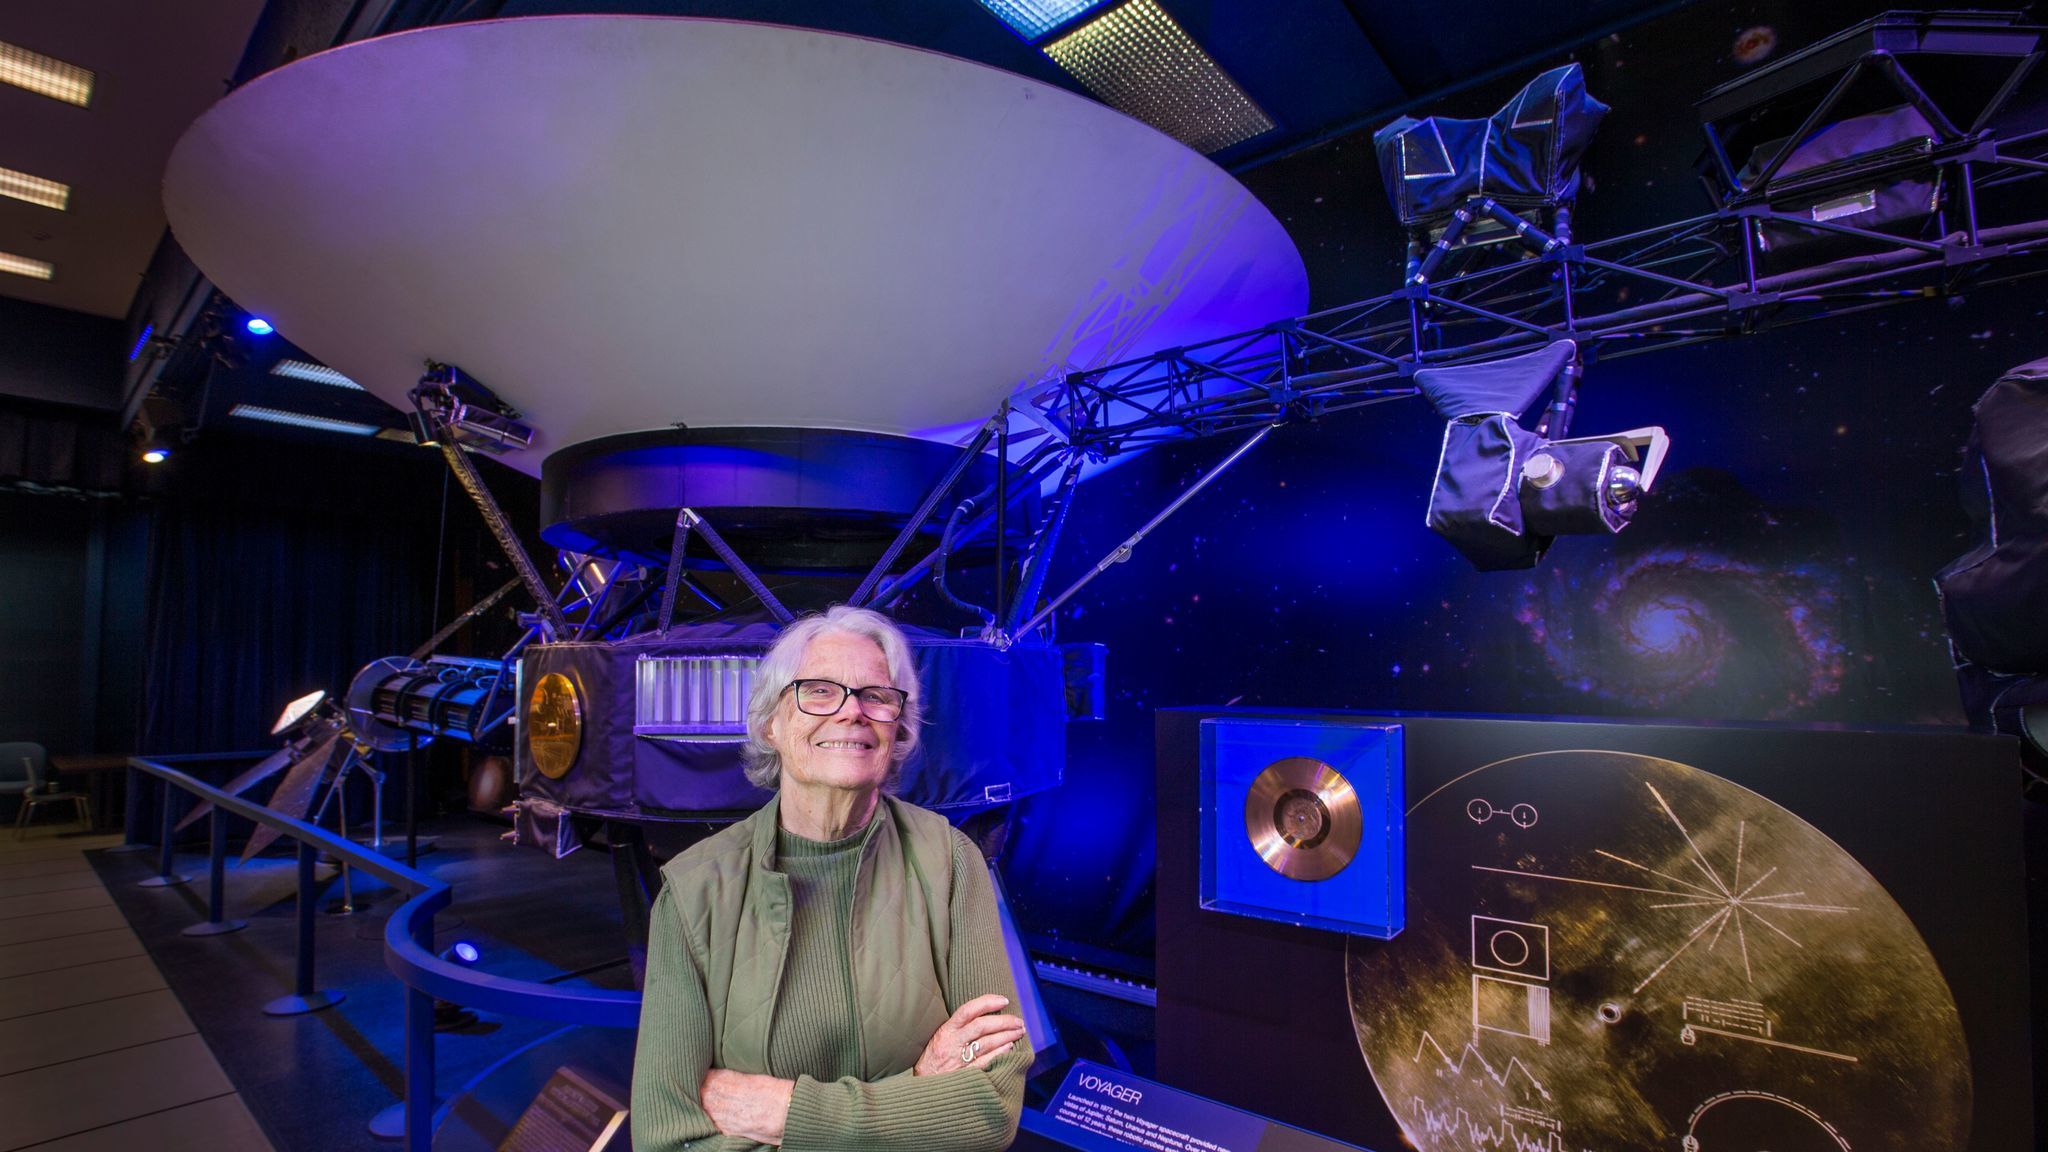 Finley, 80, shown next to a model of the Voyager 1 space probe. She worked on Voyager in the 1970s.